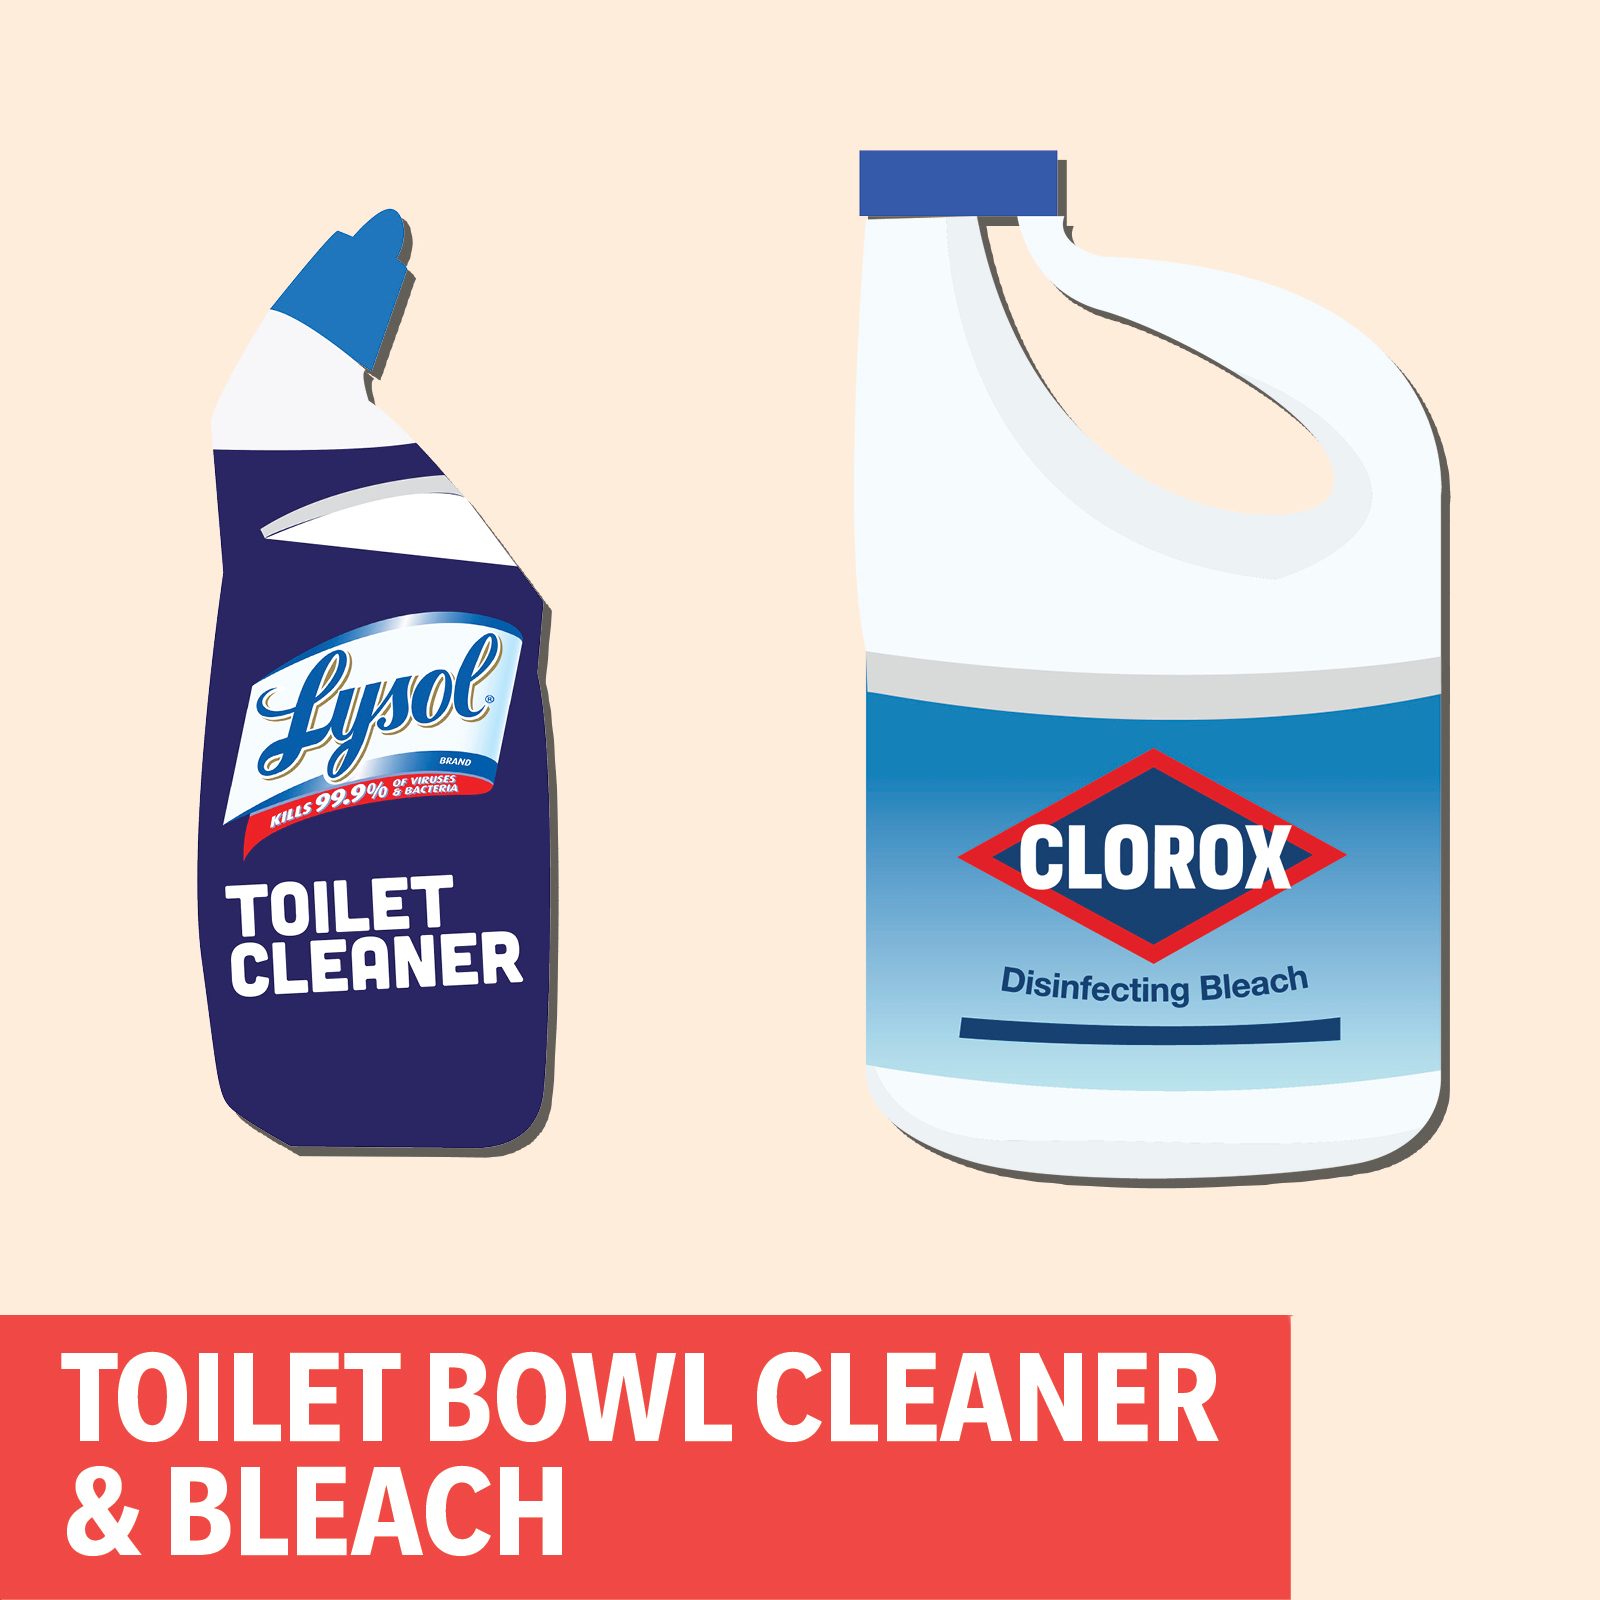 https://www.tasteofhome.com/wp-content/uploads/2018/12/Bleach-and-Toilet-Bowl-Cleaner-copy.jpg?fit=700%2C700